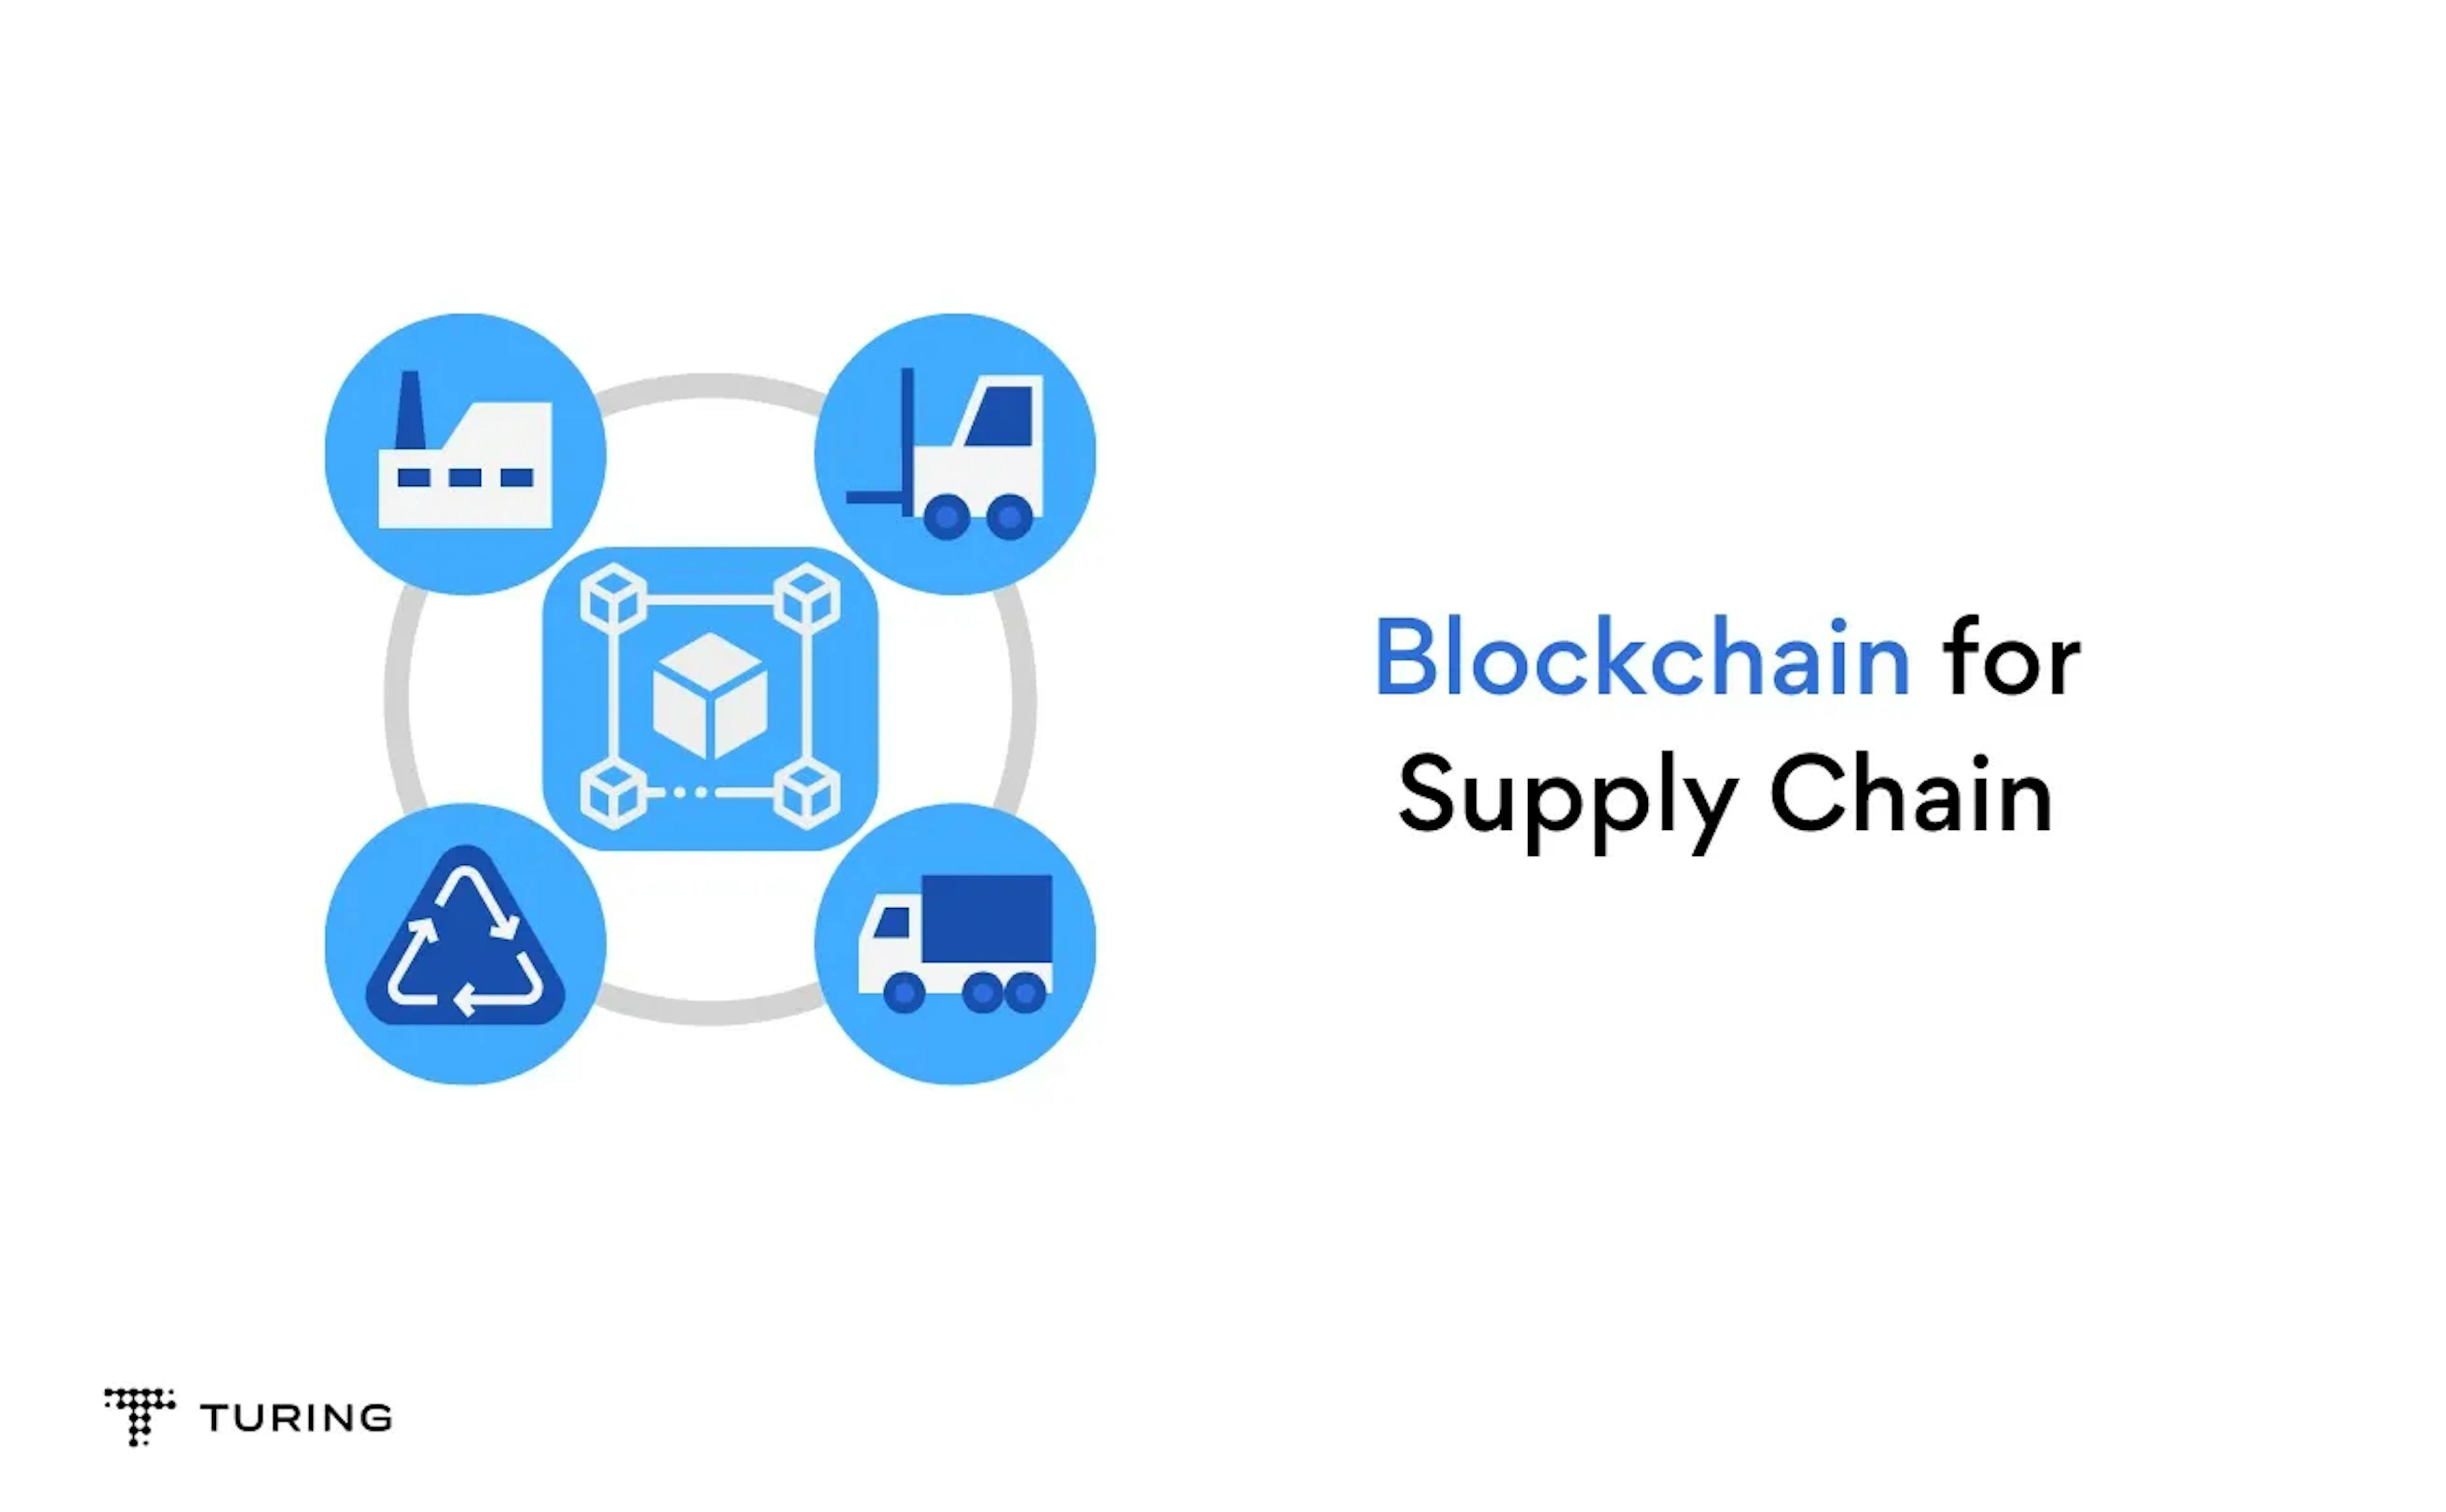 Blockchain in Supply Chain: Benefits, Use Cases & Applications